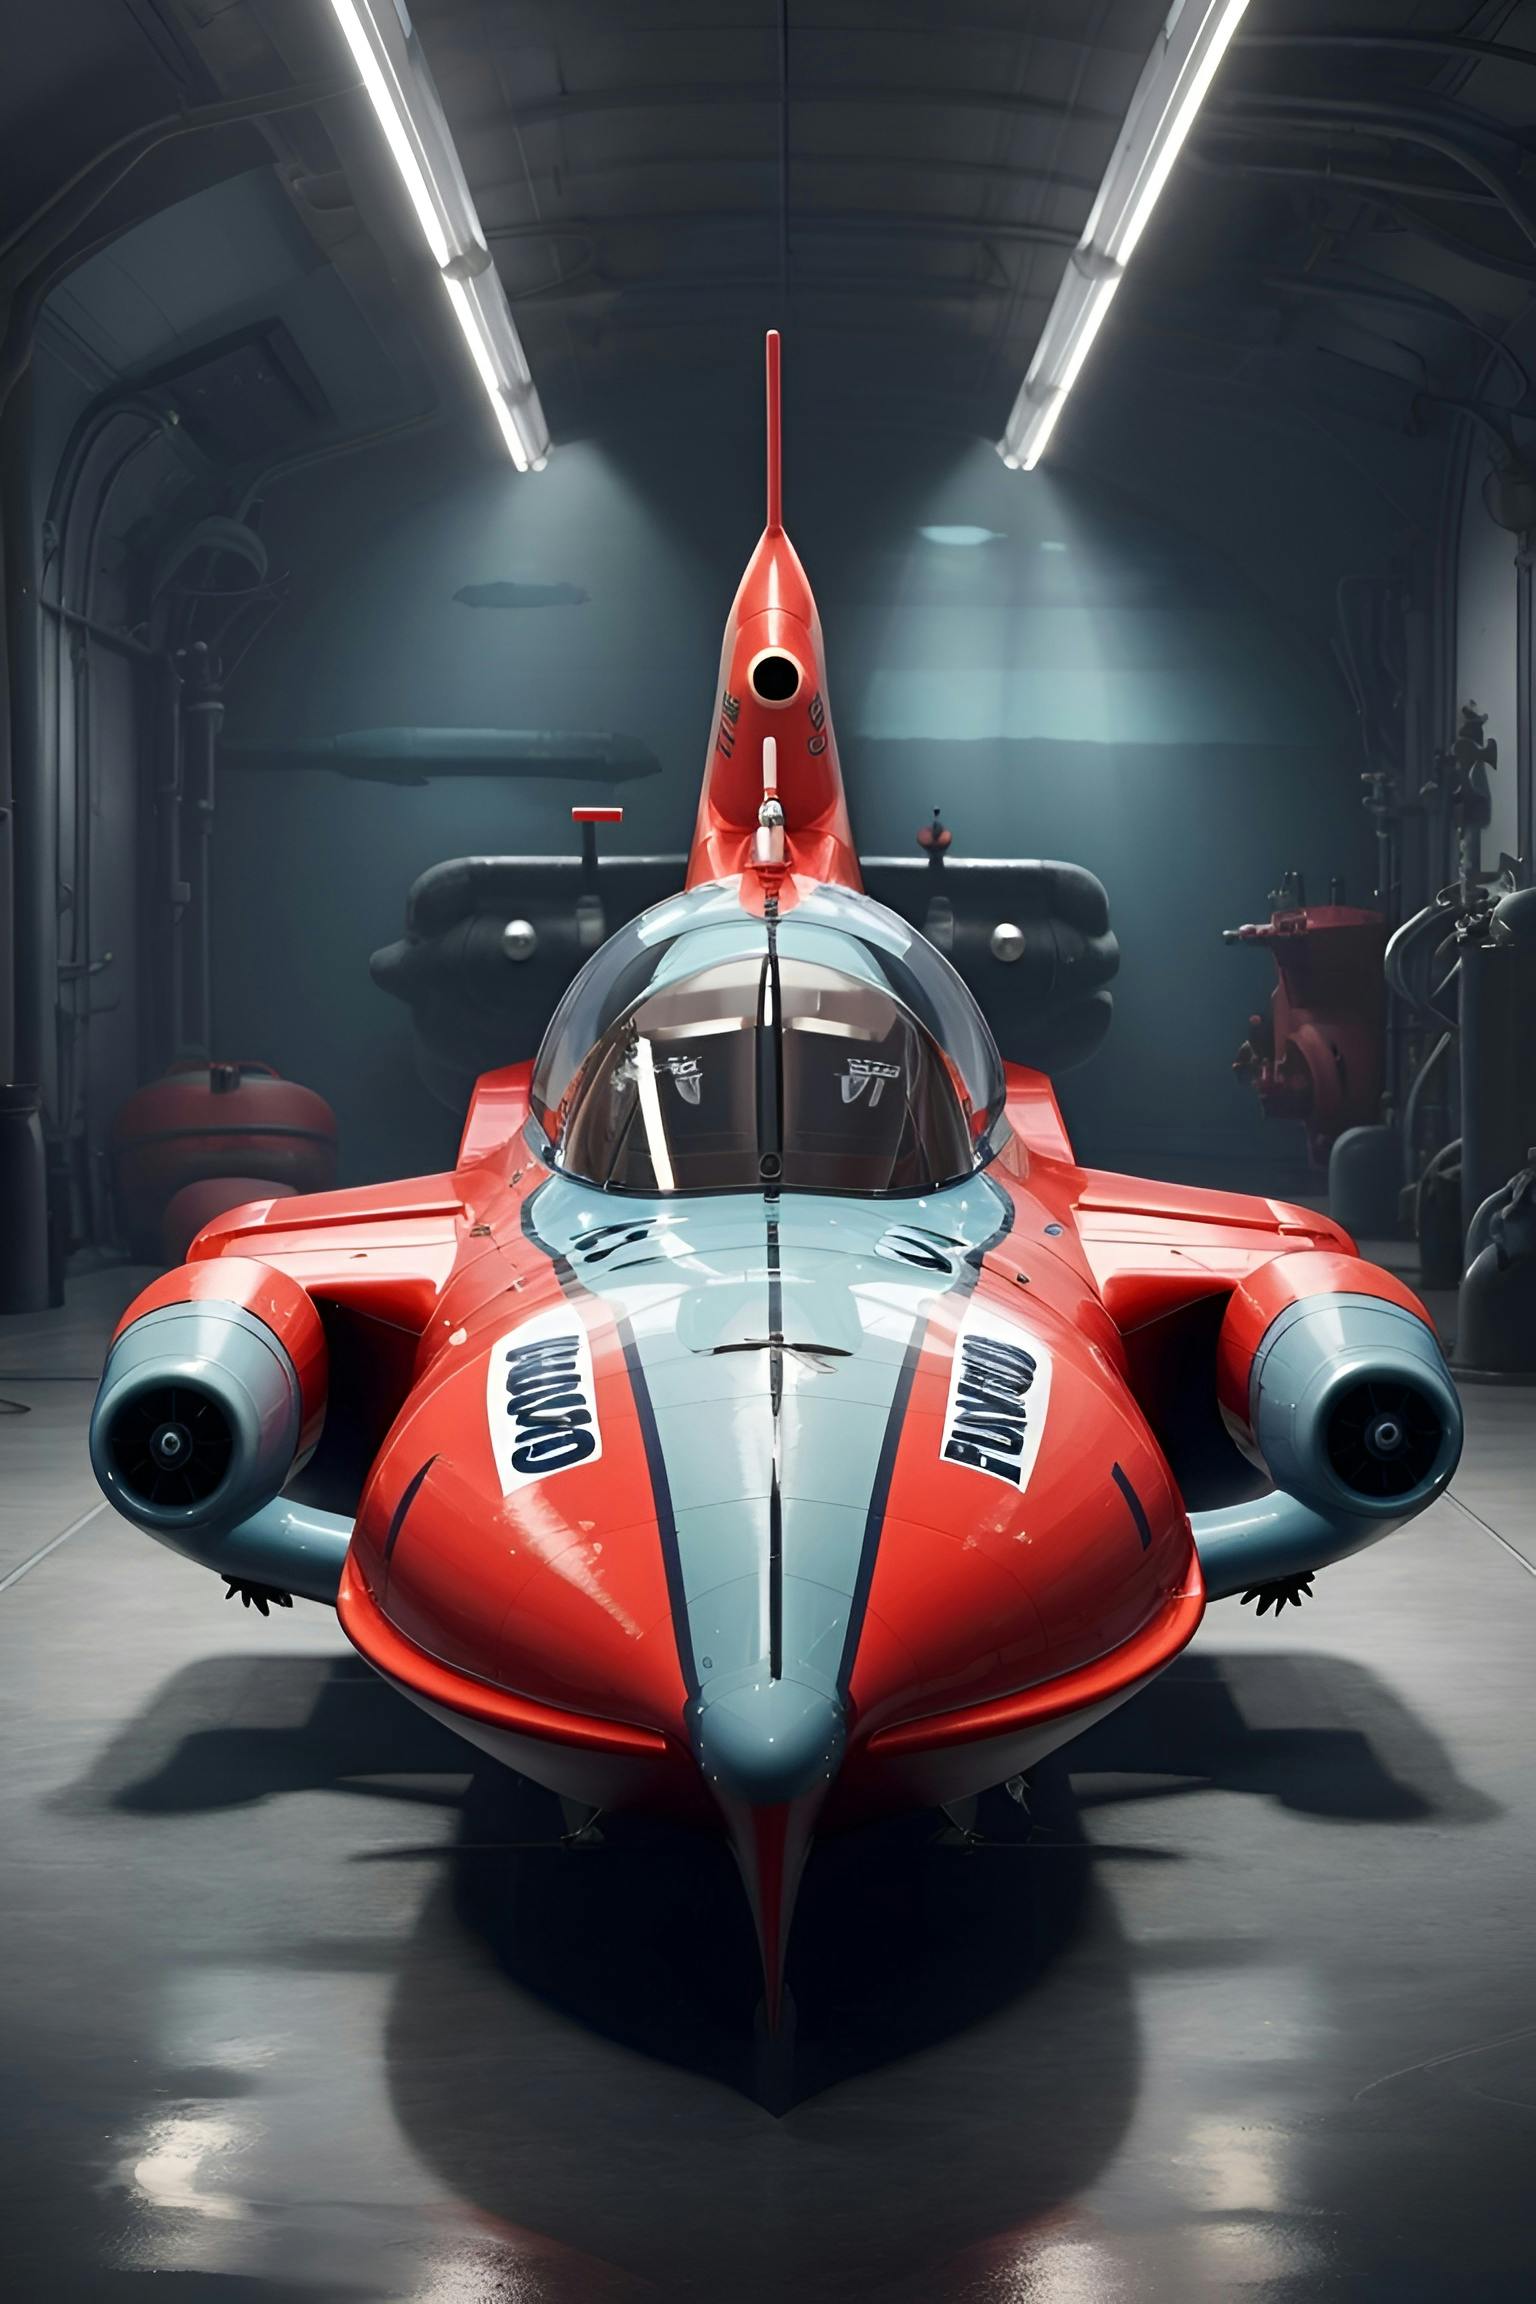 Concept image of sub racer